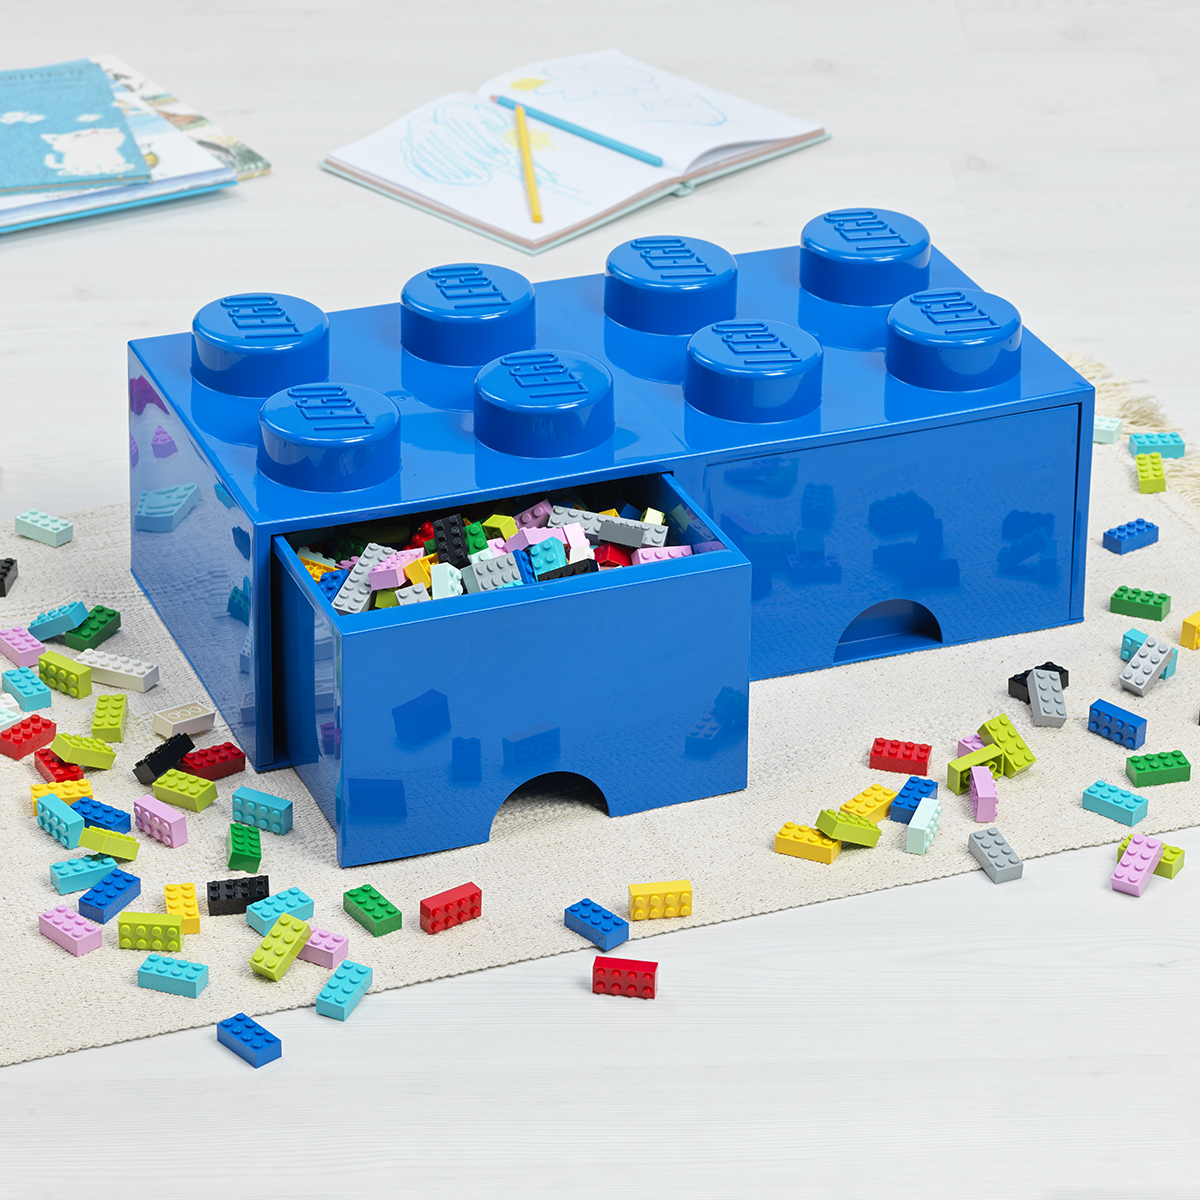 X-Large LEGO Storage Drawer | The Container Store